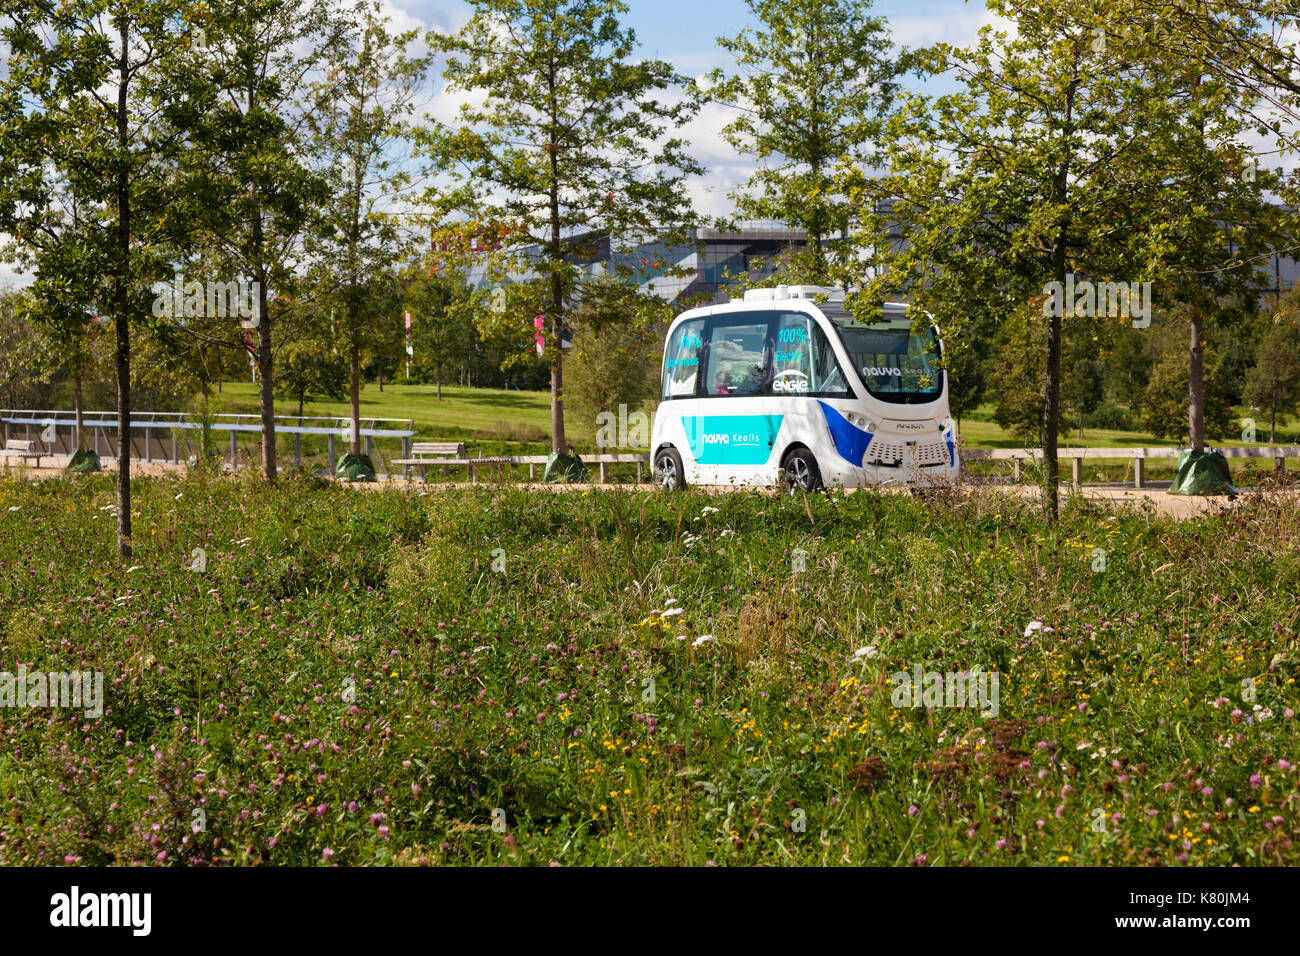 An autonomous bus on trial at the Queen Elizabeth Olympic Park, London, UK. September 2017 Stock Photo